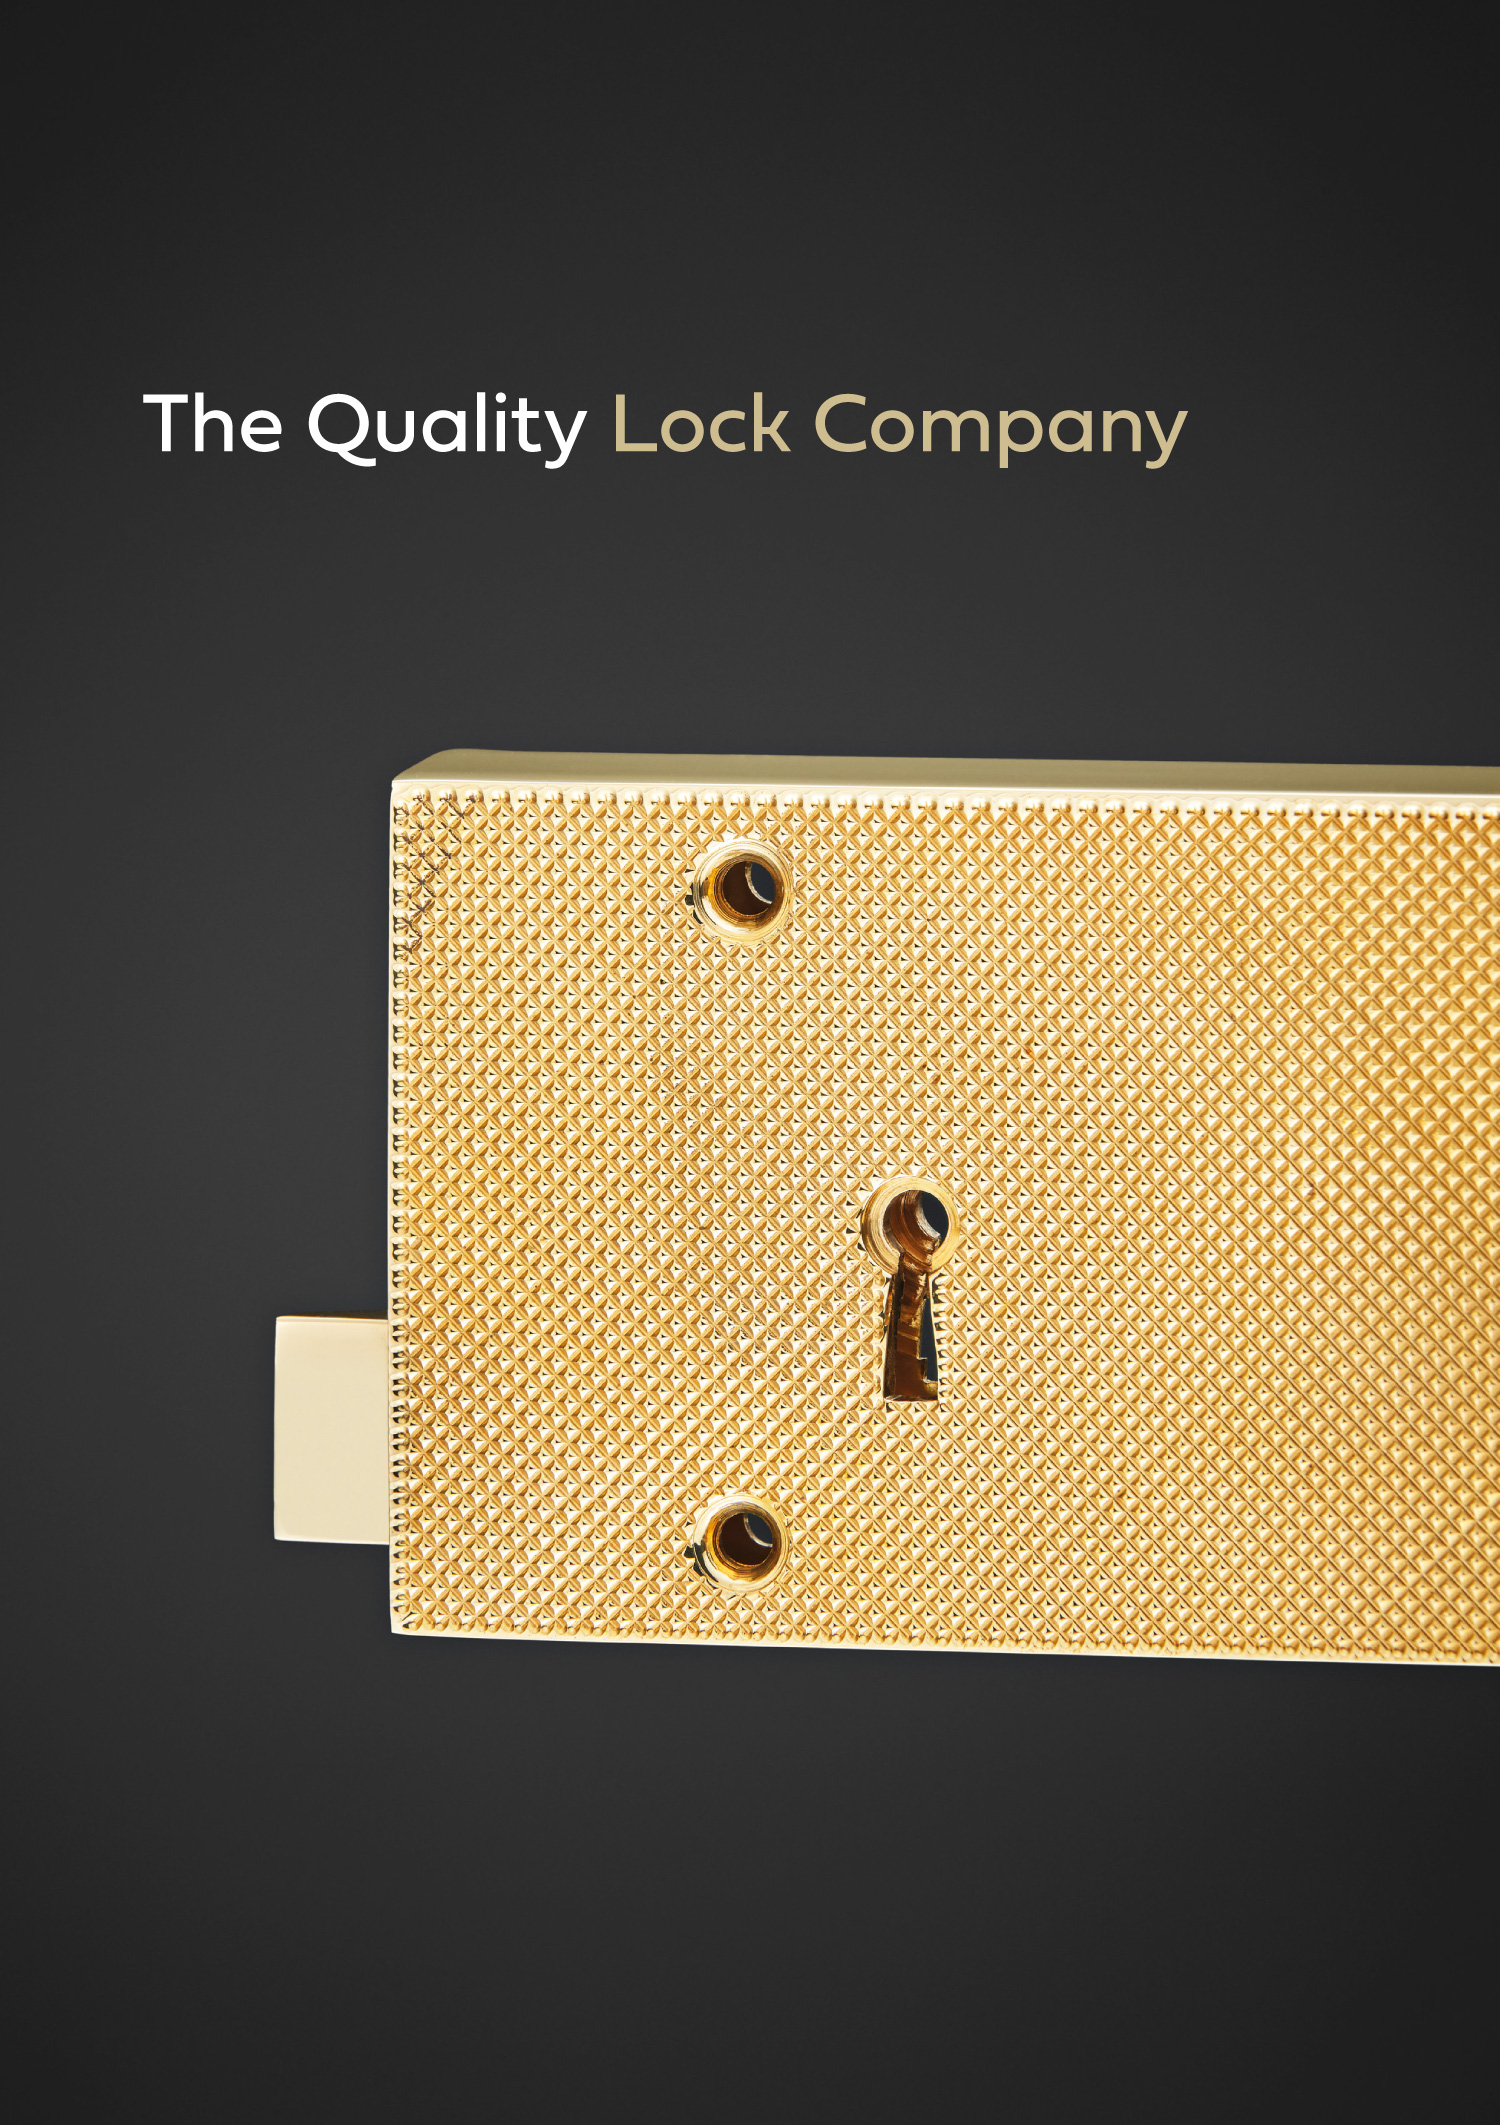 The quality lock company brochure by Croft